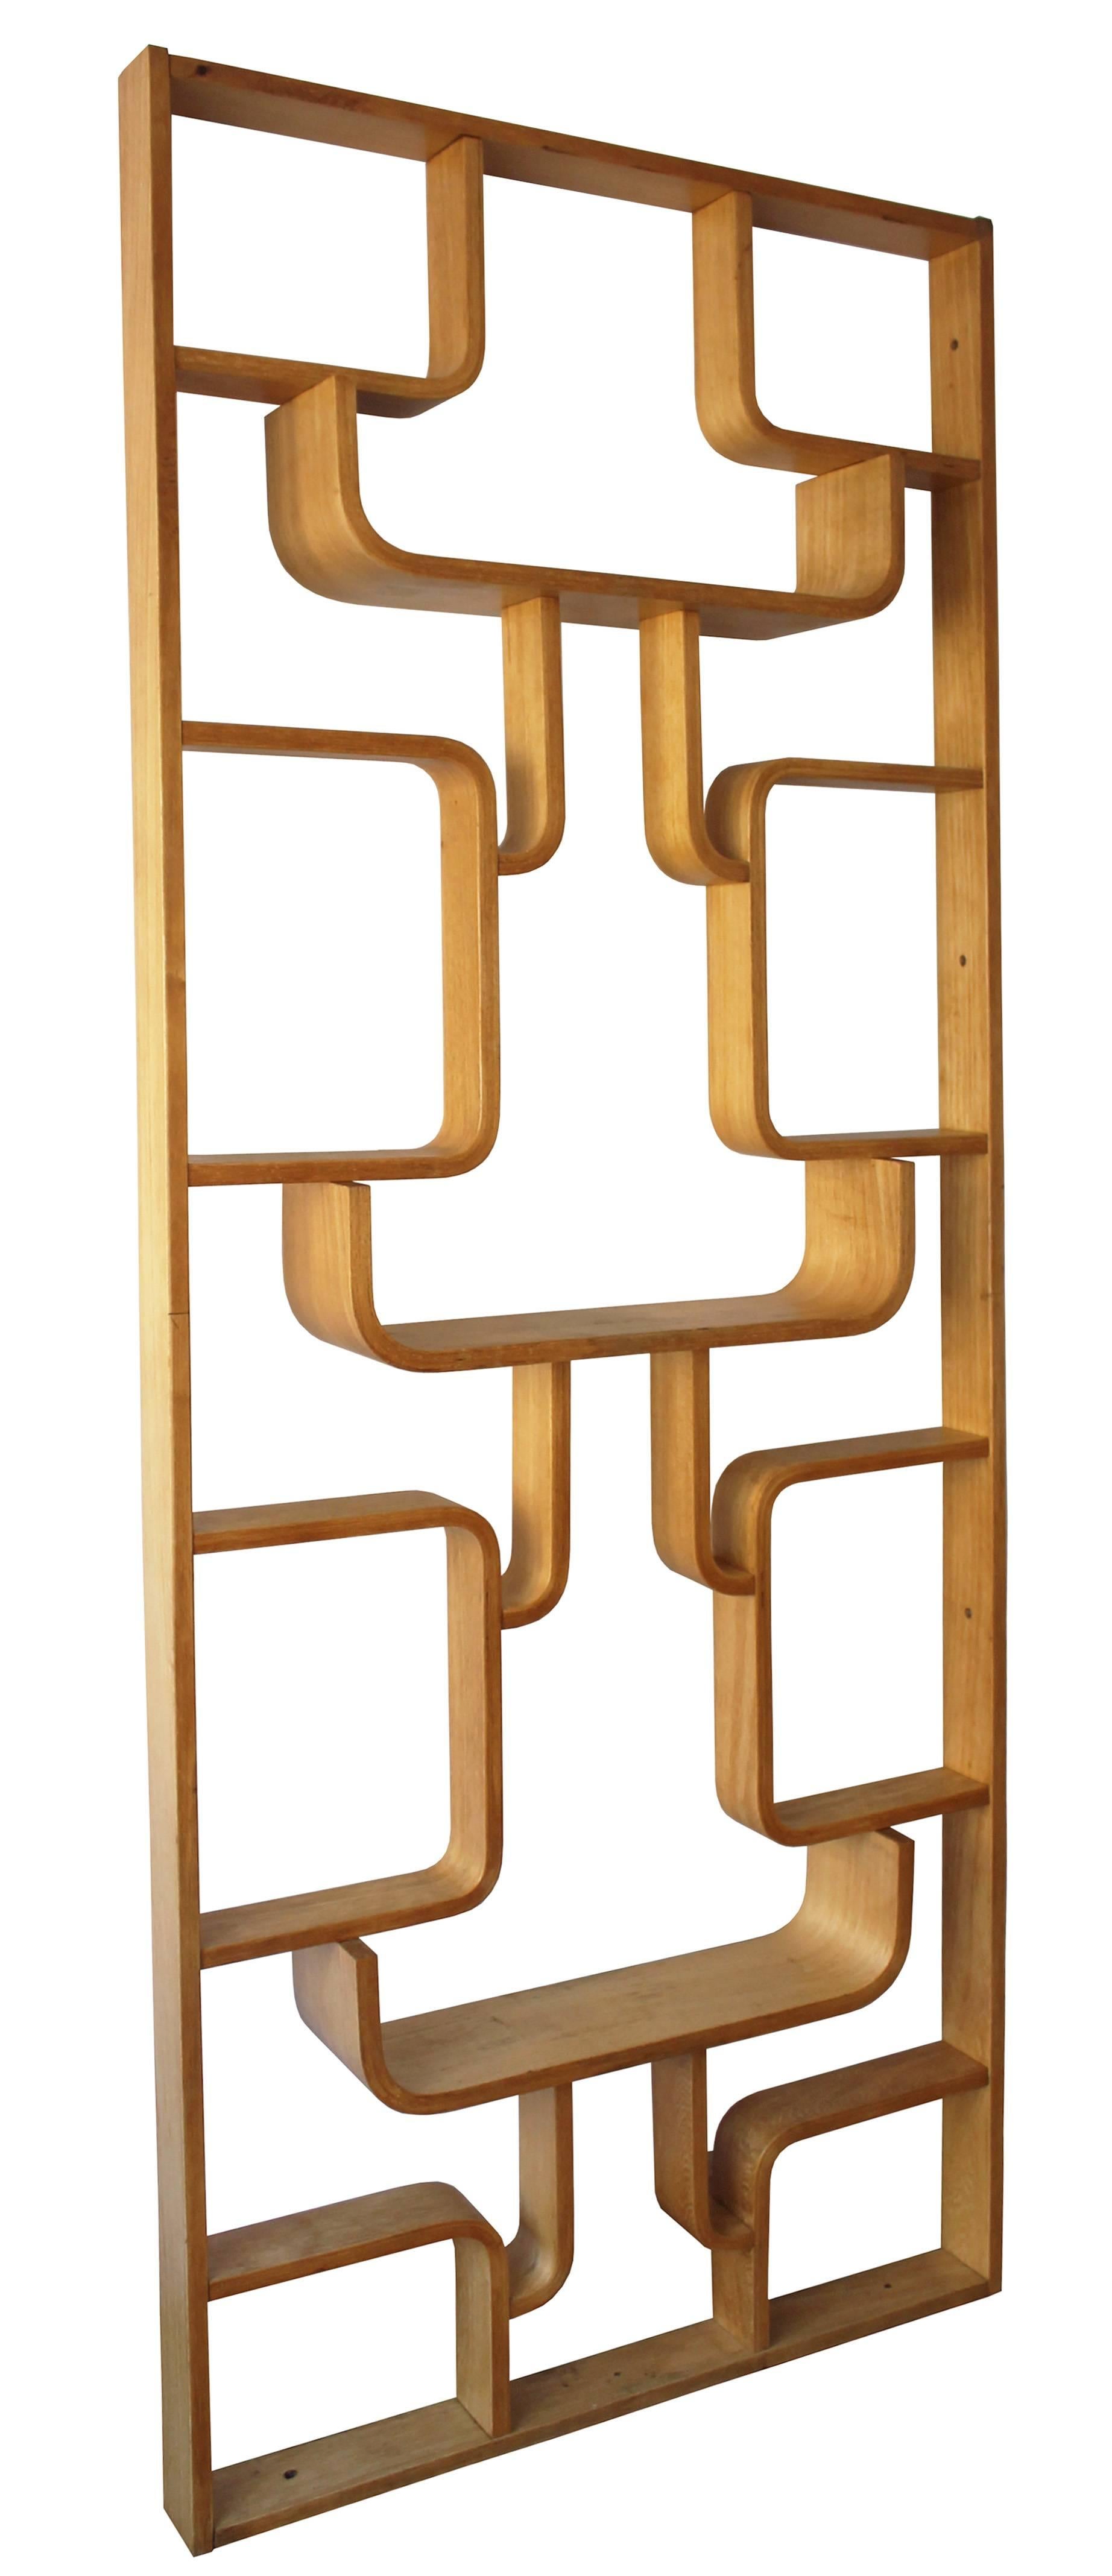 A wall divider designed by Czech architect, Ludvik Volak and manufactured by Drevopodnik Holešov, Czechoslovakia in the 1960s. A perfect sculptural piece that can be used as a plant stand, a wall divider, shelving or simply just for